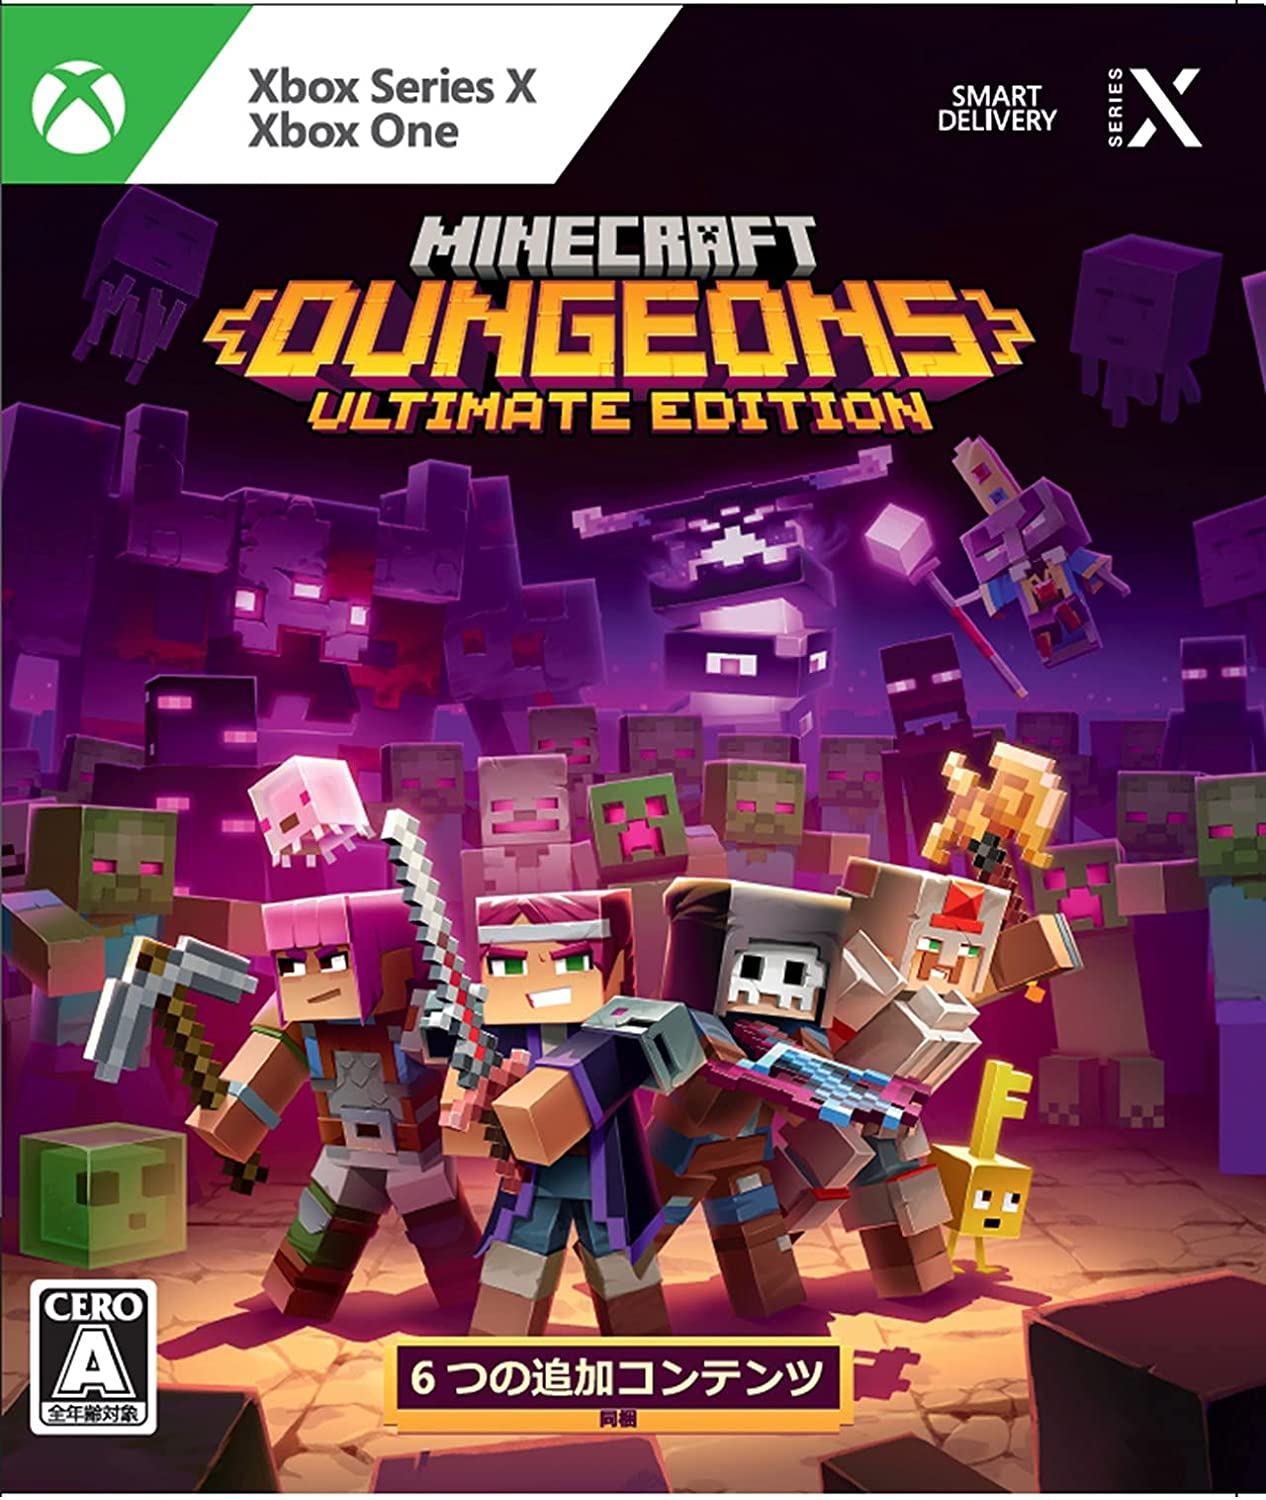 Minecraft Series Xbox Xbox X Dungeons for [Ultimate One, Edition]